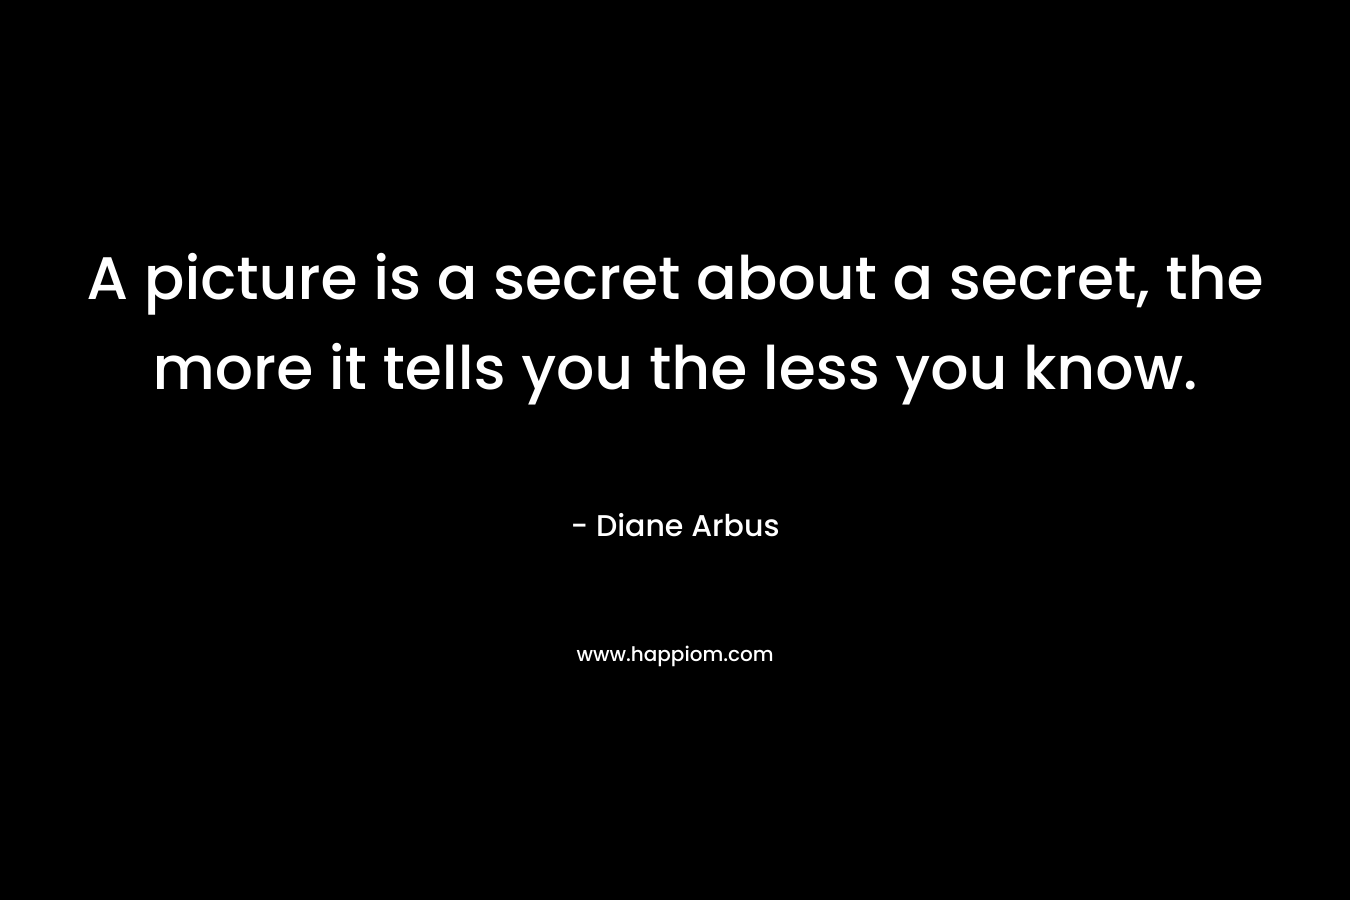 A picture is a secret about a secret, the more it tells you the less you know.